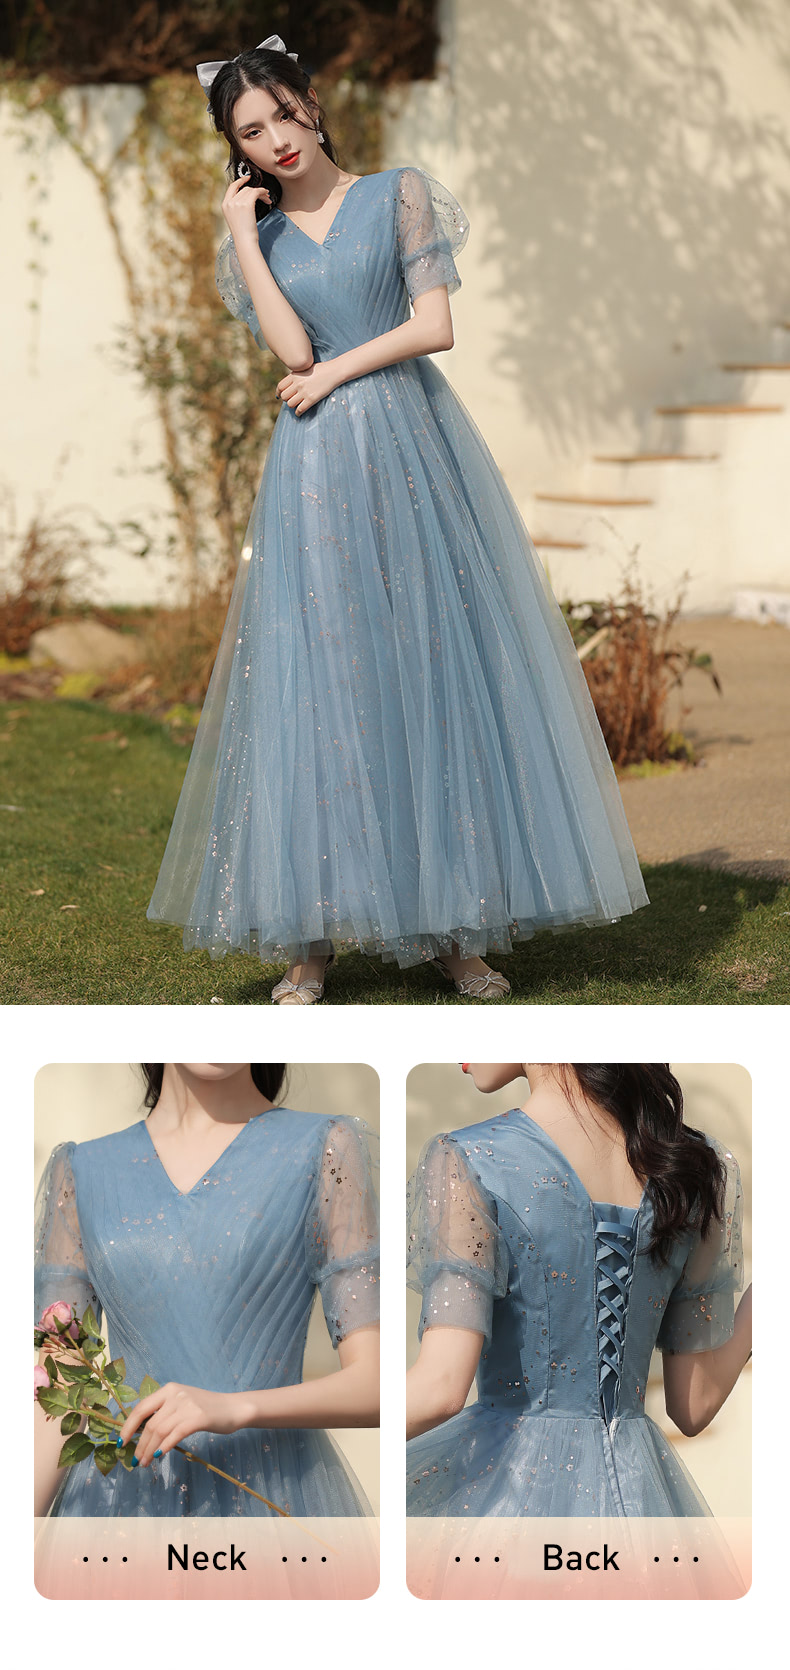 Blue-Bridesmaid-Dress-Wedding-Female-Guest-Gown-with-4-Styles16.jpg